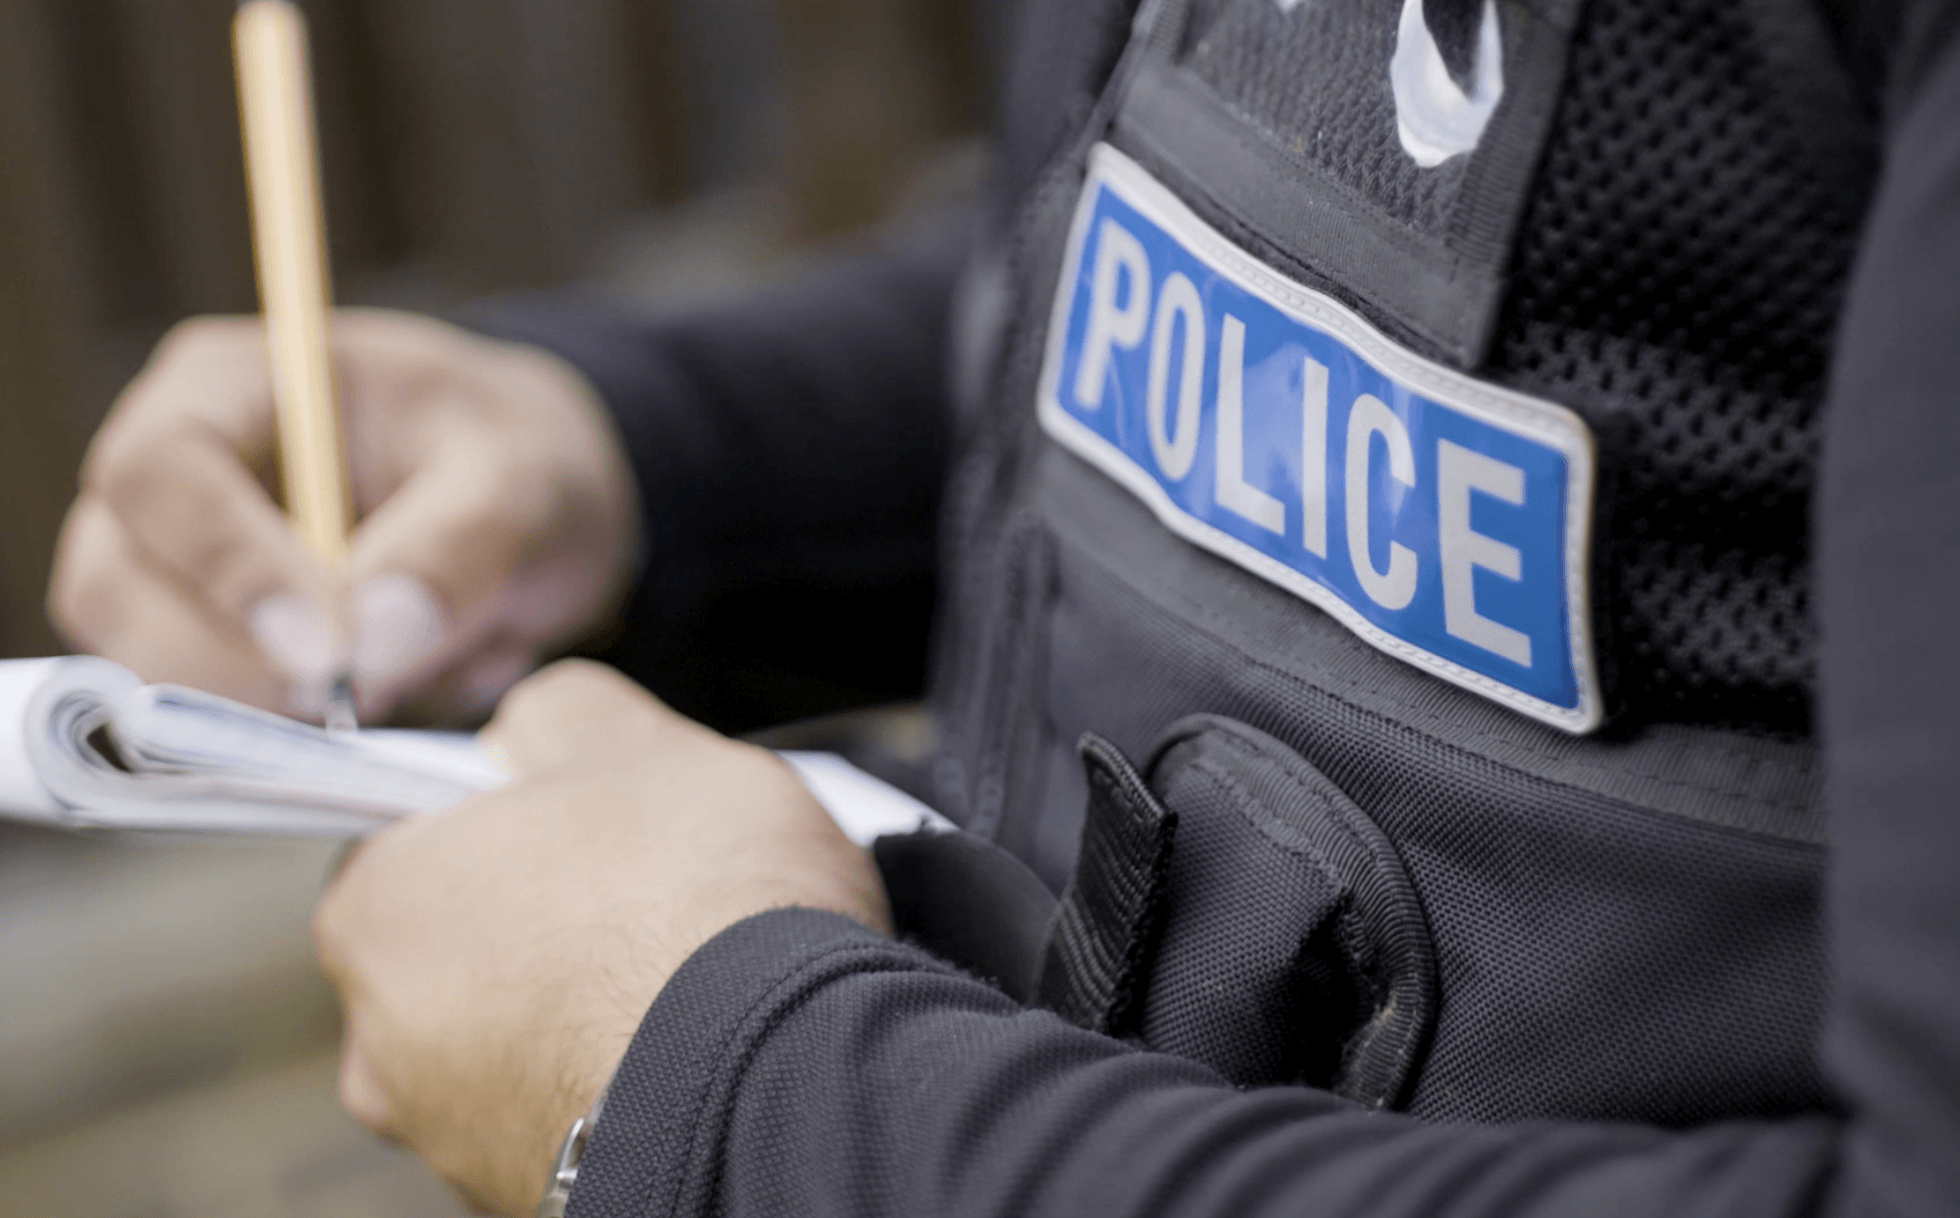 Teenager charged for knife possession after Nottingham altercation - West Bridgford Wire